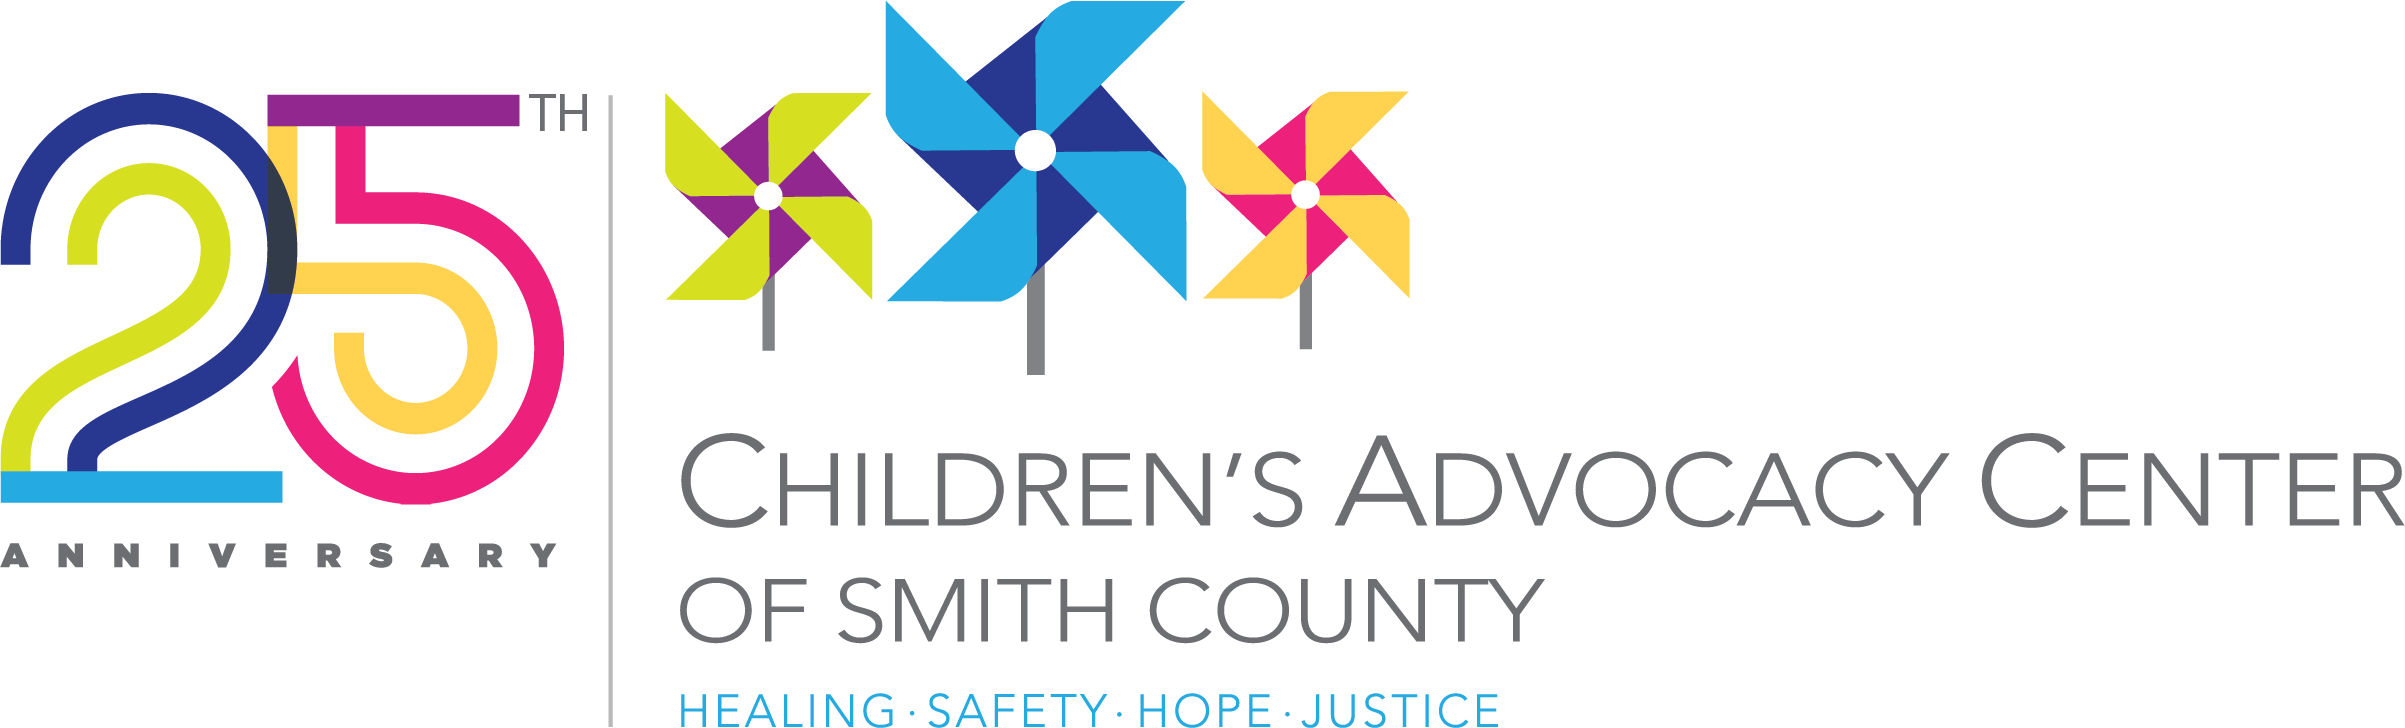 Making an Impact: The Children's Advocacy Center